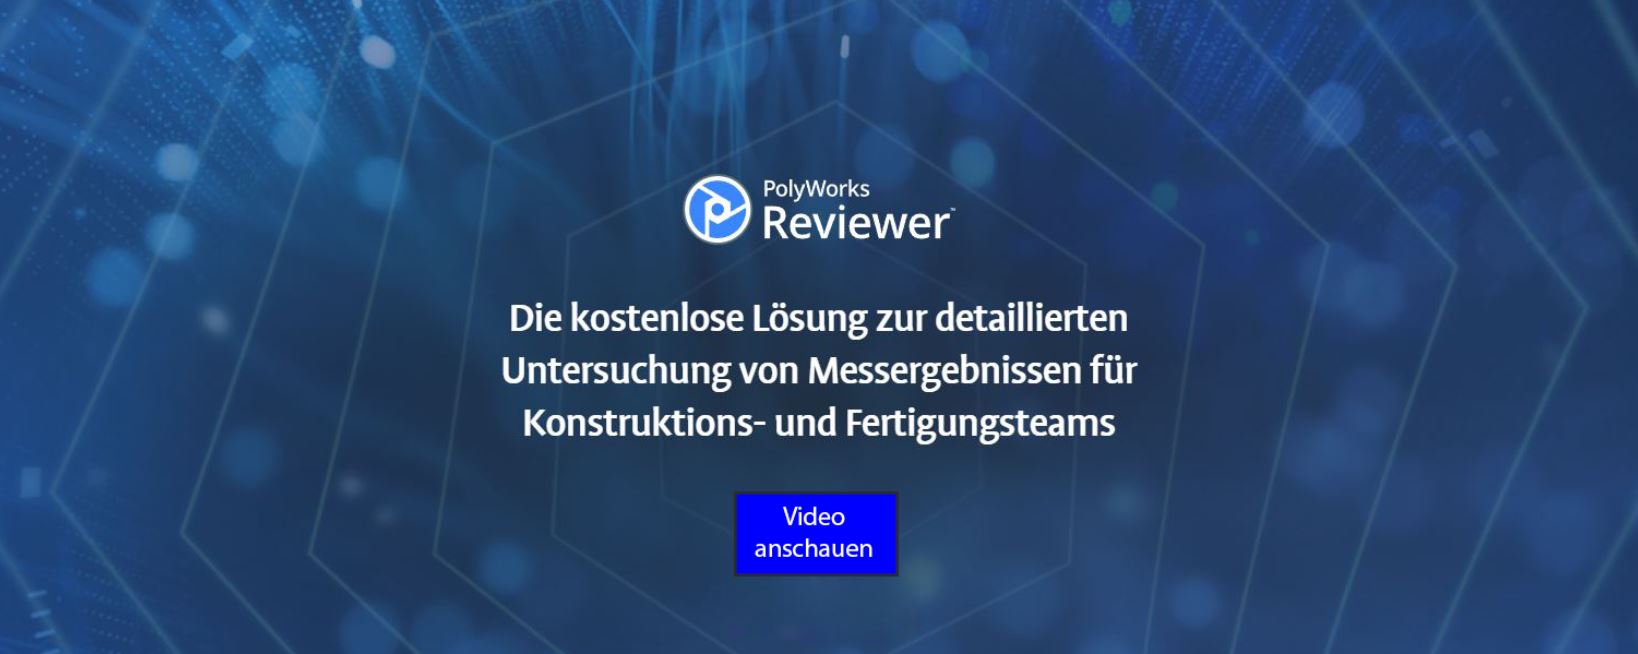 ReviewerPage-Video